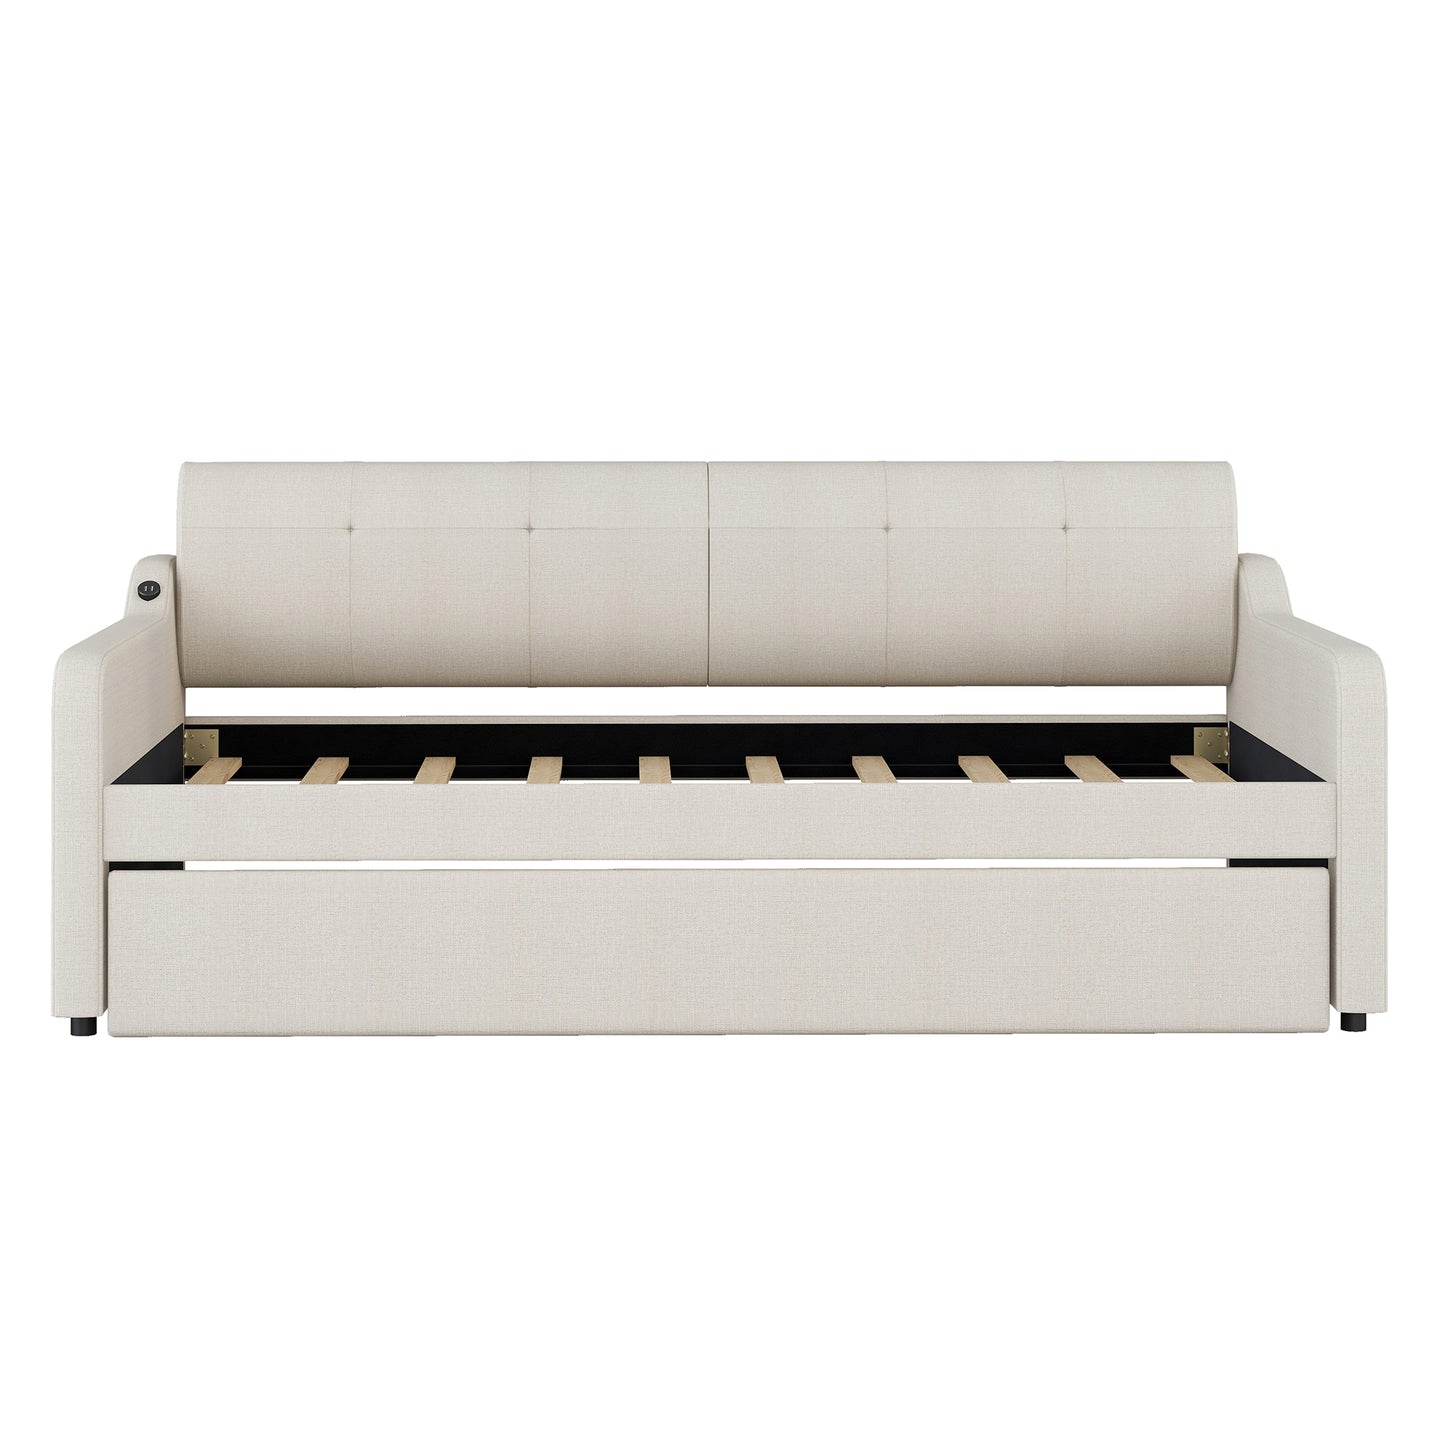 Twin Size Upholstery Daybed with Trundle and USB Charging Design,Trundle can be flat or erected,Beige